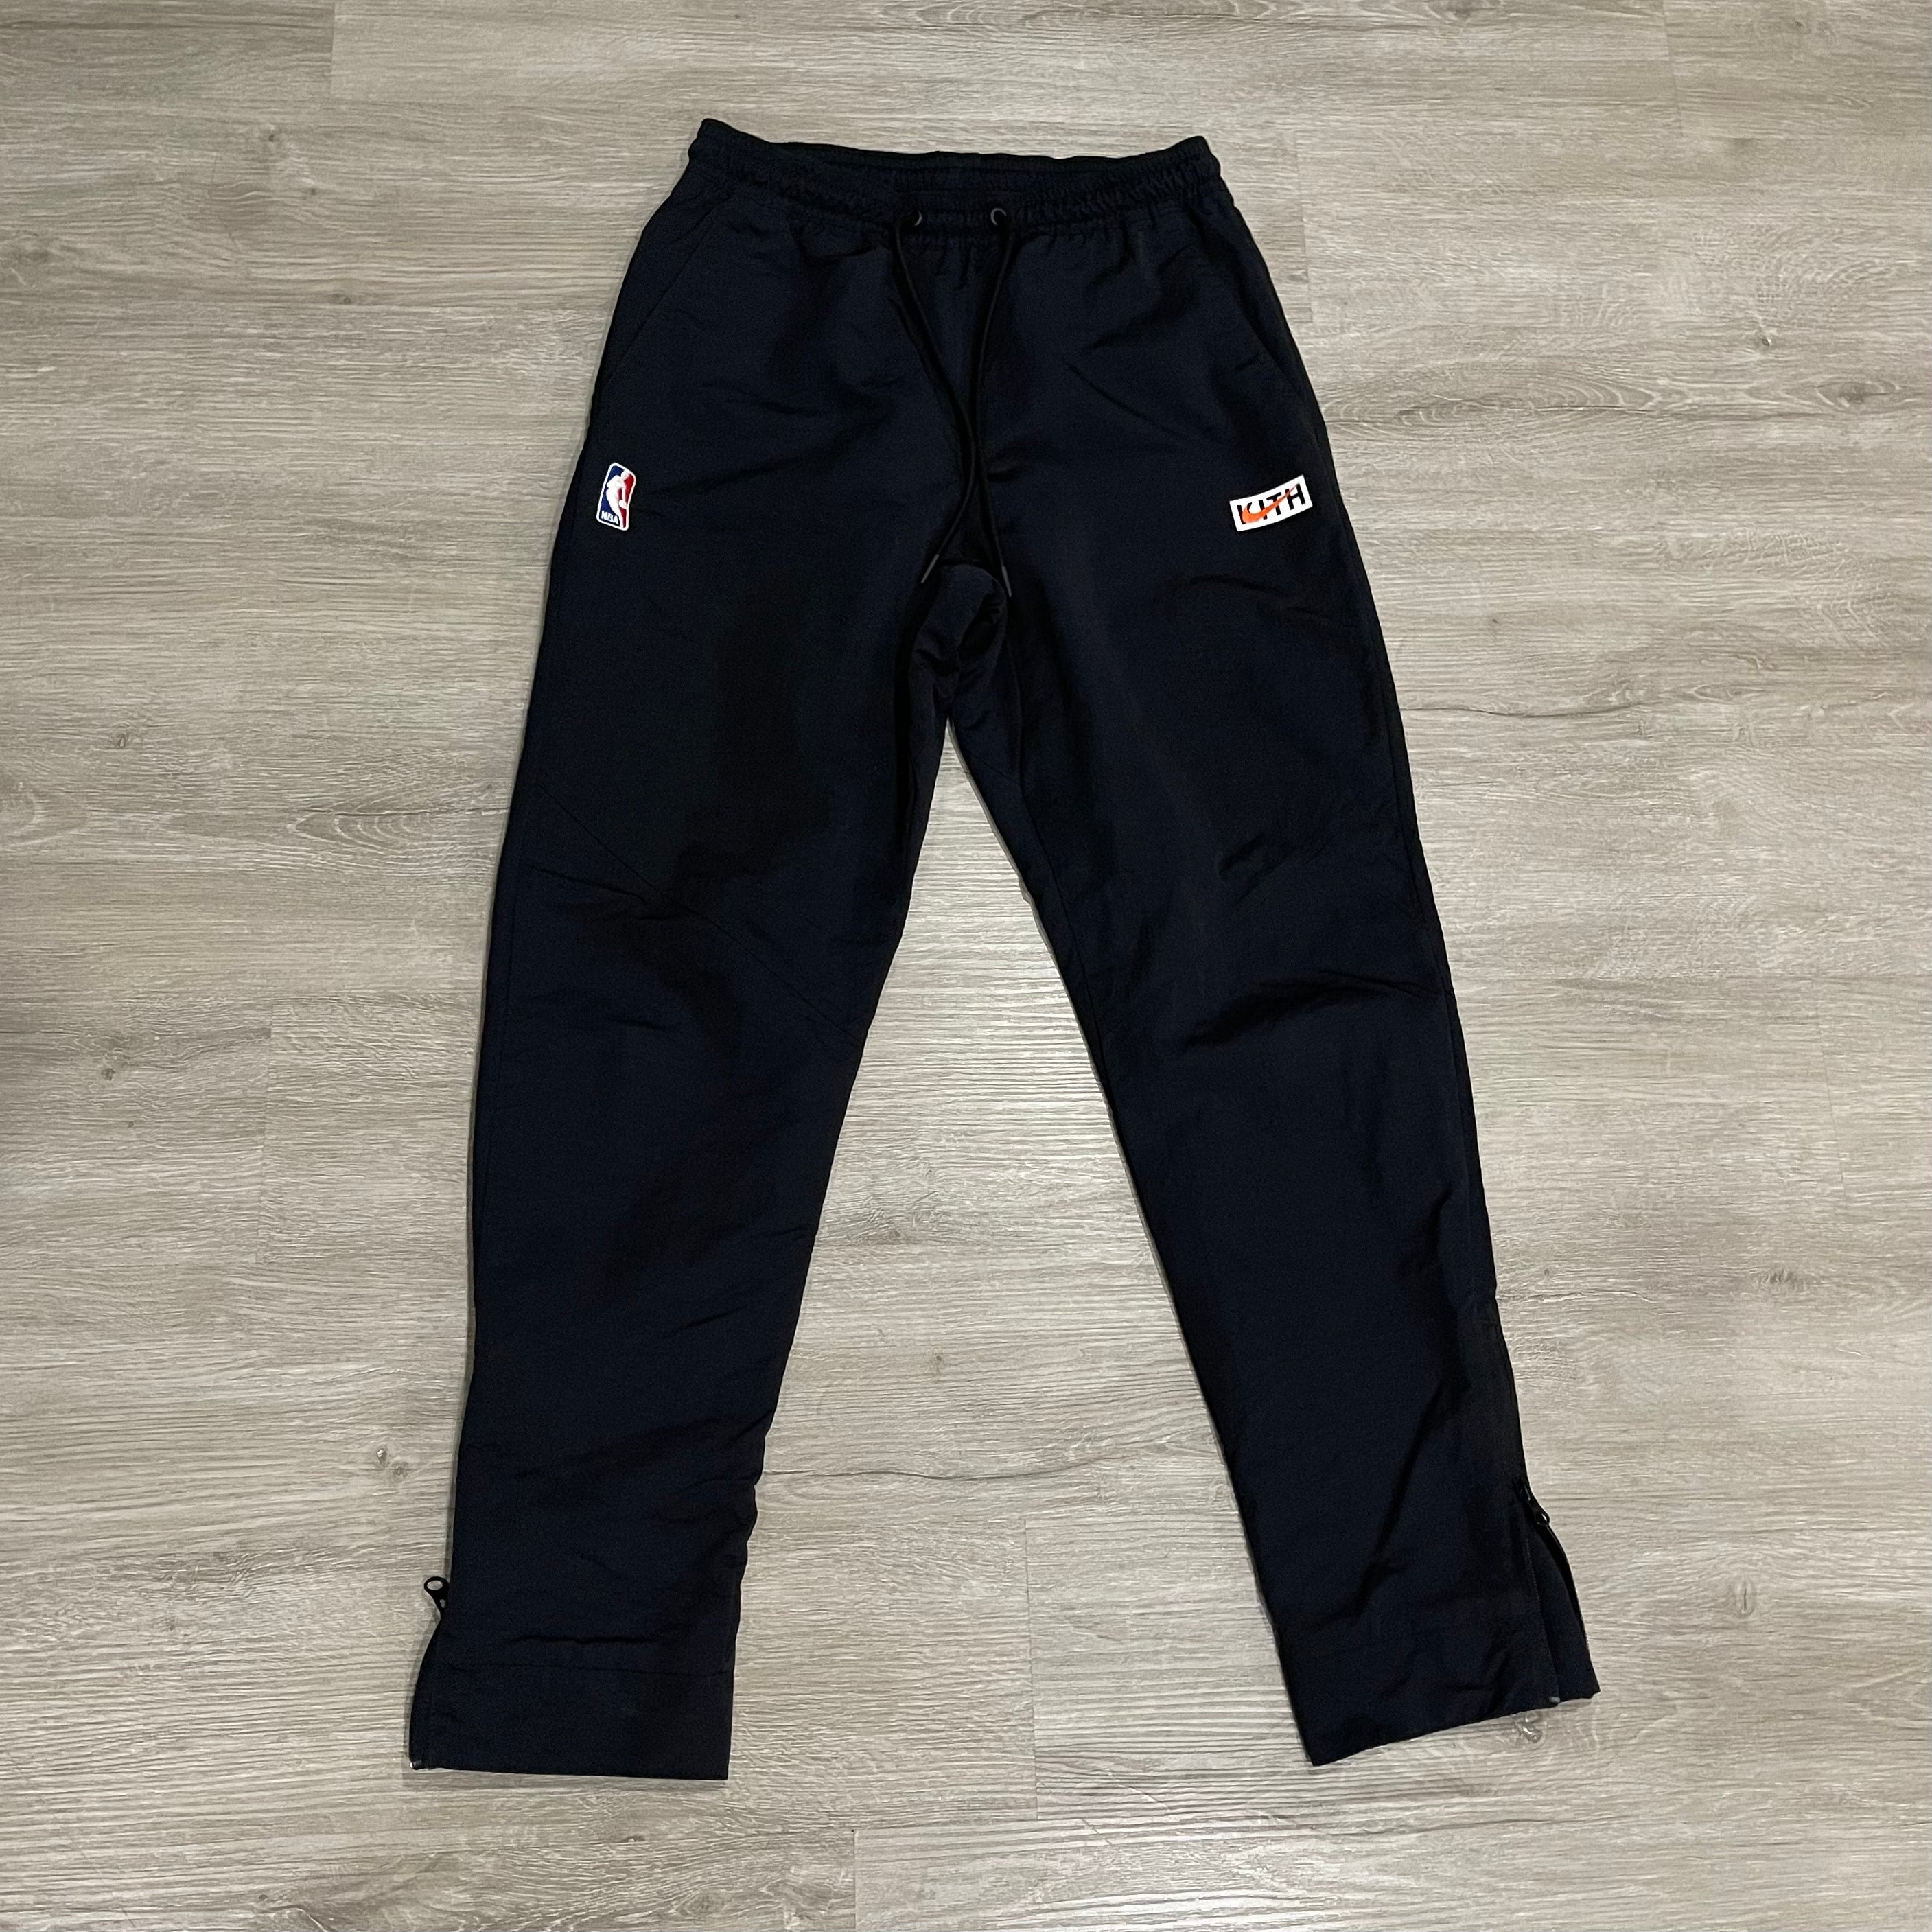 Kith Nike for New York Knicks Trackpants Size Small $100